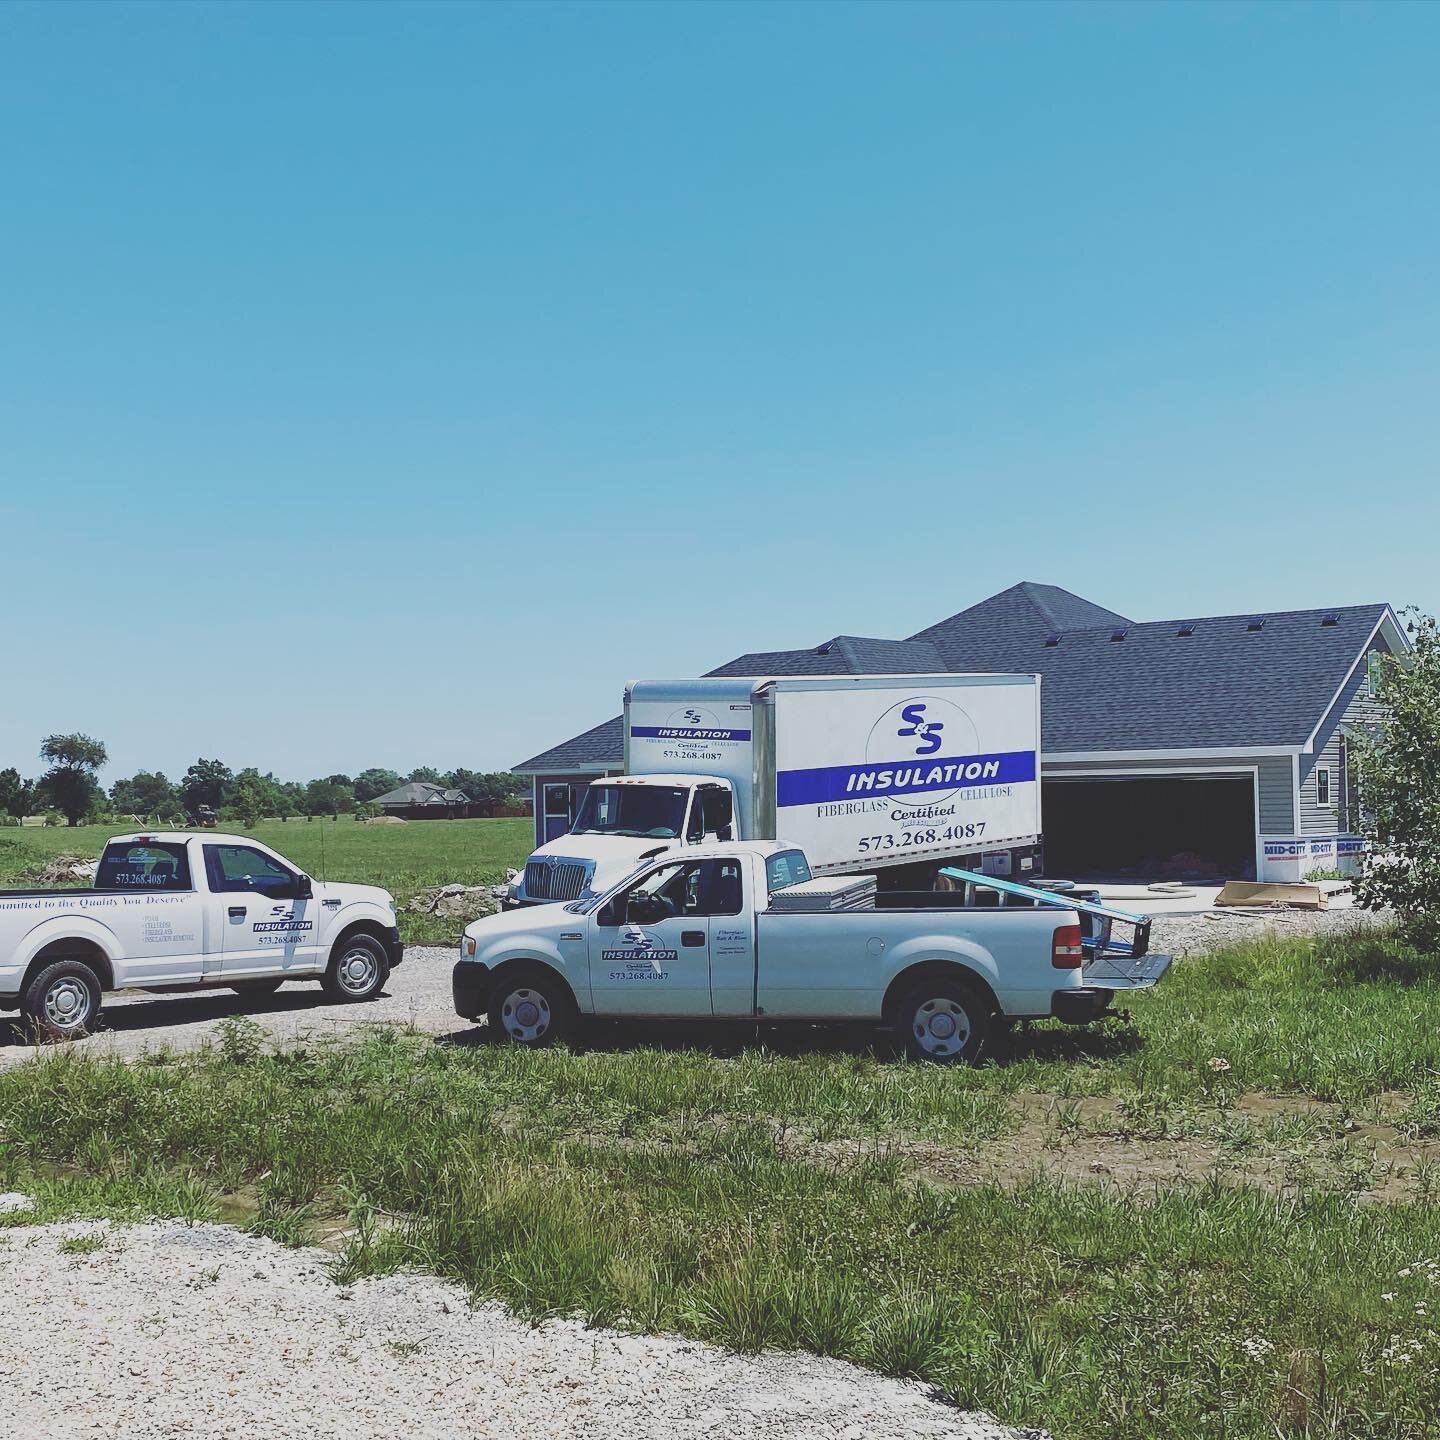 Our crews are out doing an awesome job on a new home in Sturgeon, MO today. Getting wall sprayed cellulose, and fiberglass batts.
.
.
.
#insulation #insulationcontractors #insulationcompany #energy #energysaving #energyefficiency #sandsinsulation #ag